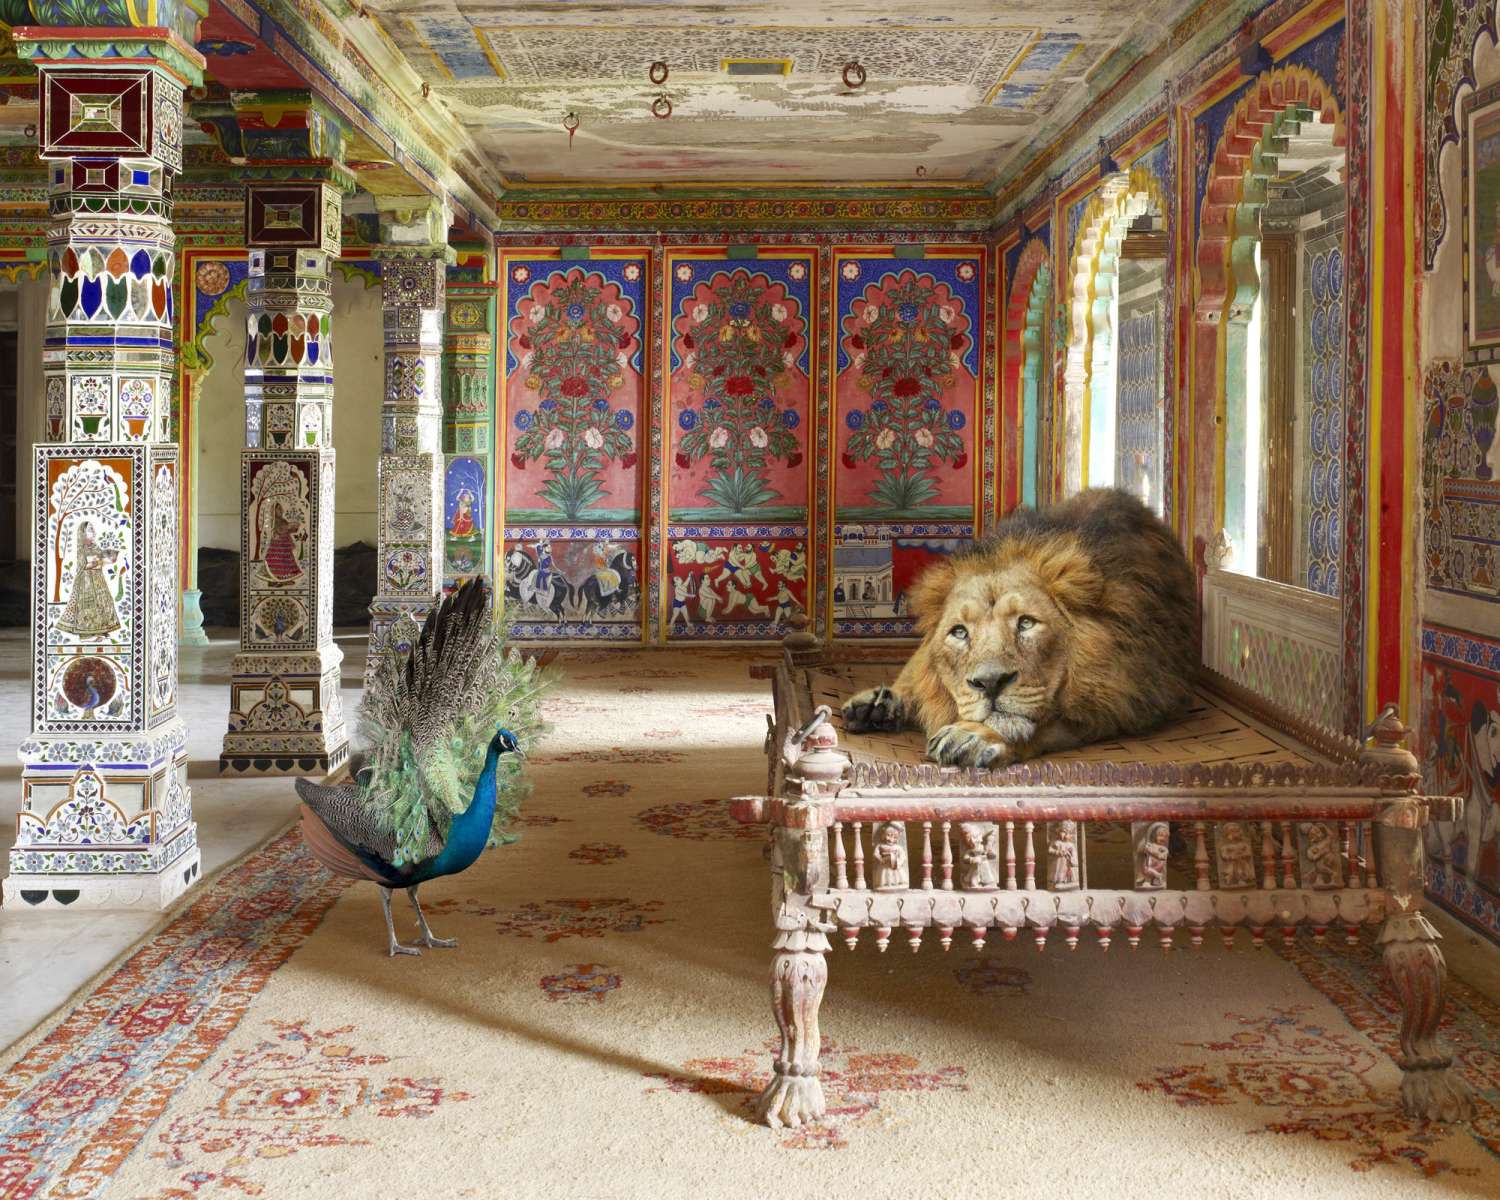 In Conversation With American Photographer Karen Knorr London-based and German-born American photographer Karen Knorr tells us about her work 